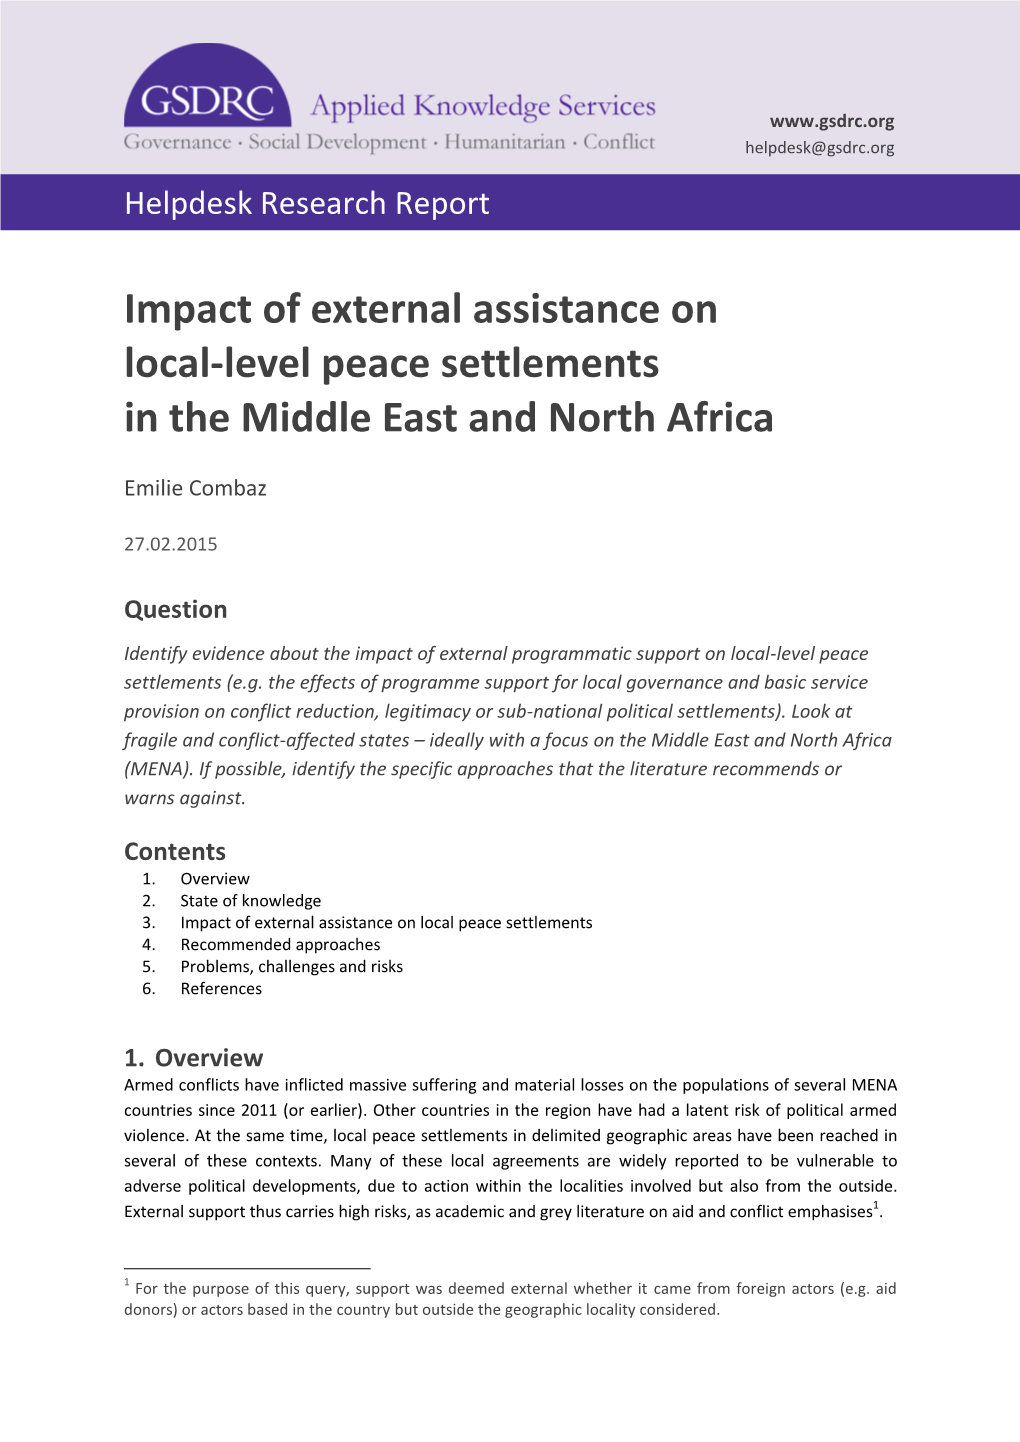 Impact of External Assistance on Local-Level Peace Settlements in the Middle East and North Africa